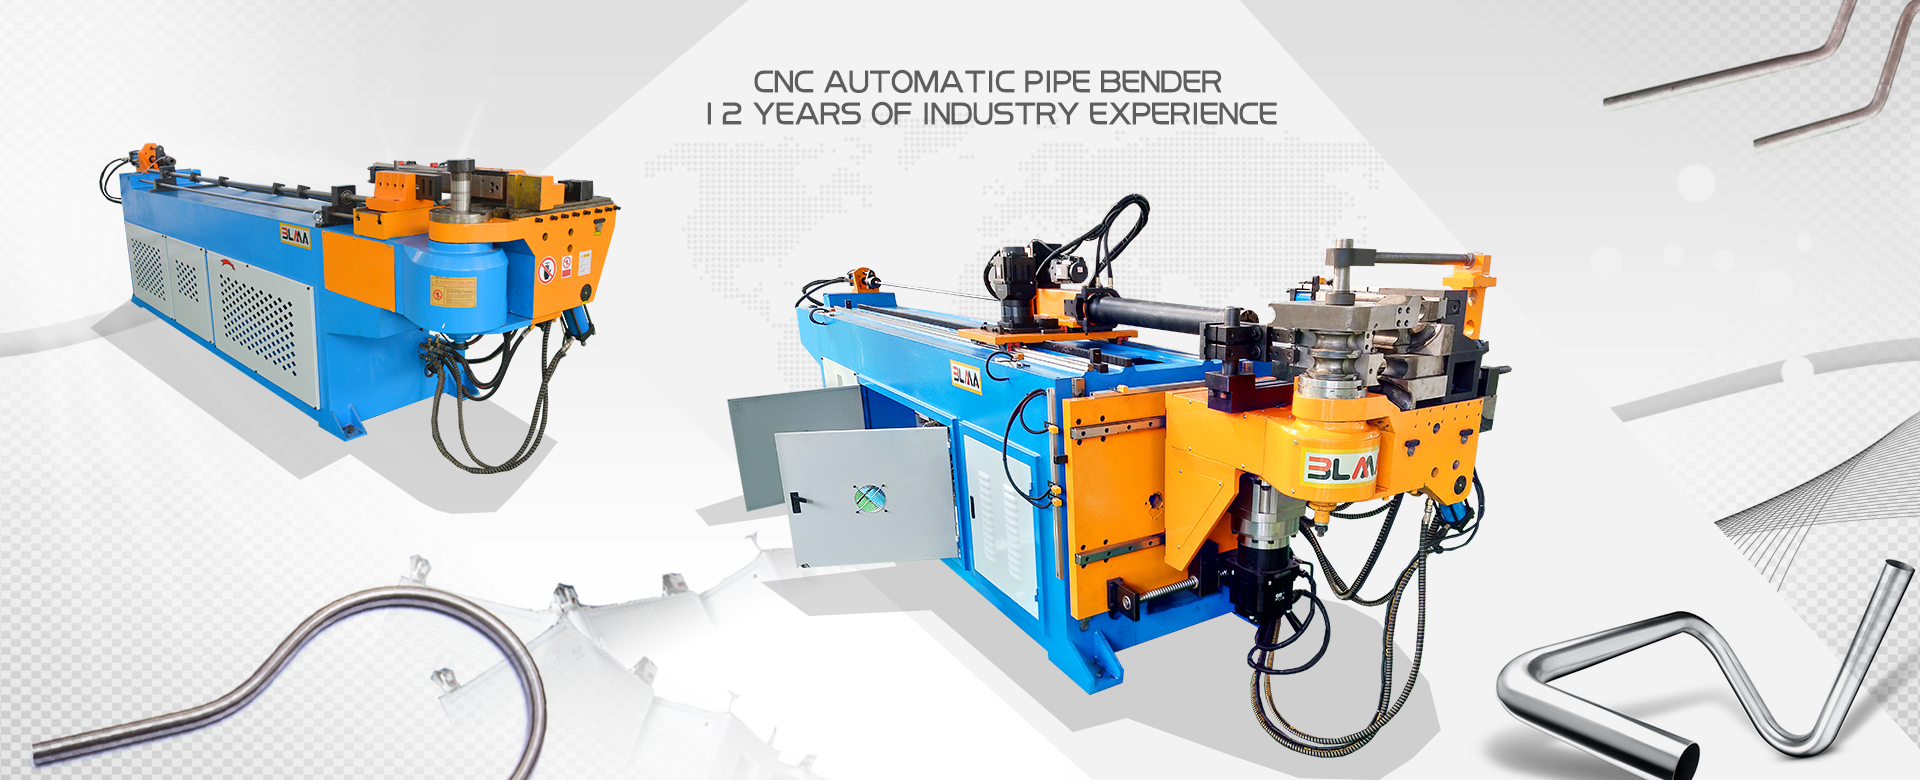 3 Axis Pipe Bending Machine